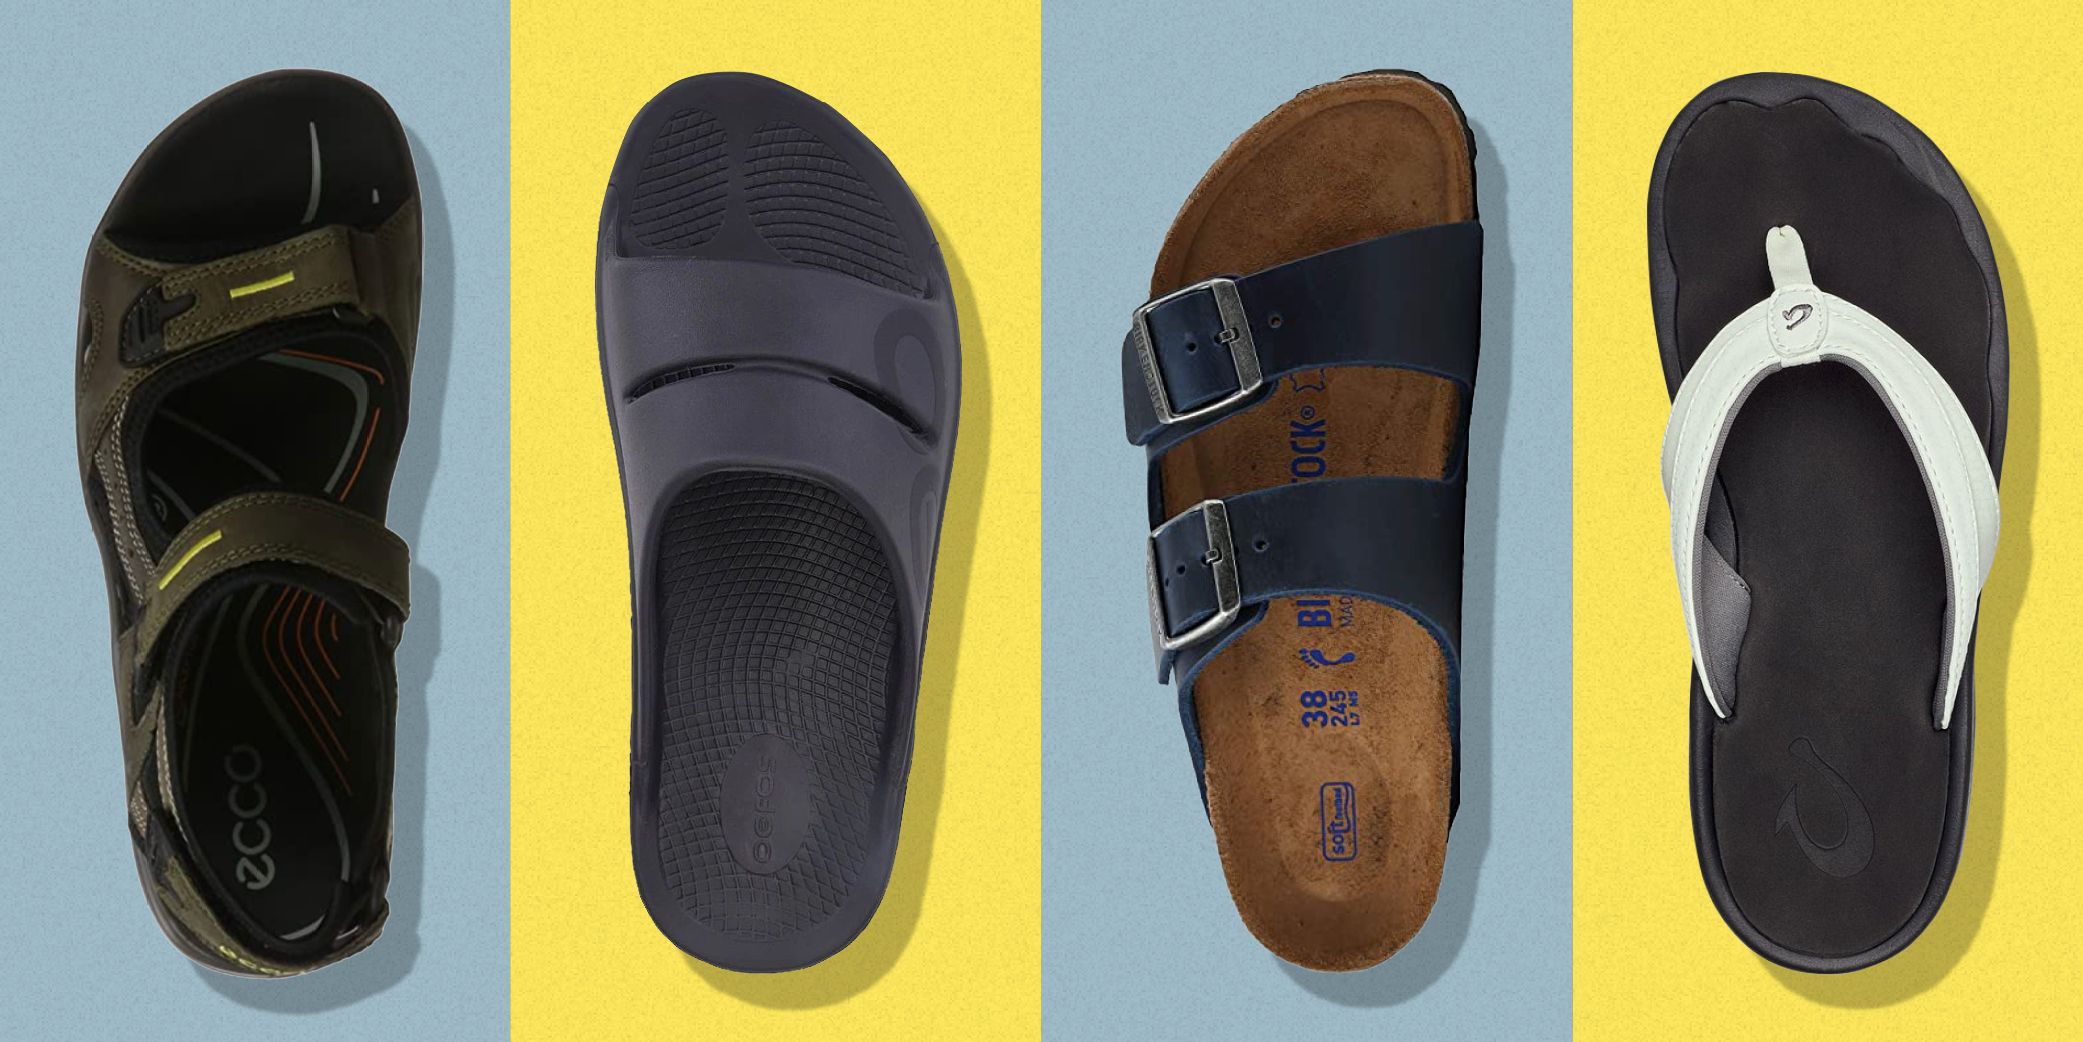 Which sandals would be suitable to avoid dry foot and cracks in foot  (Crocs, Adidas, Woodlands)? - Quora